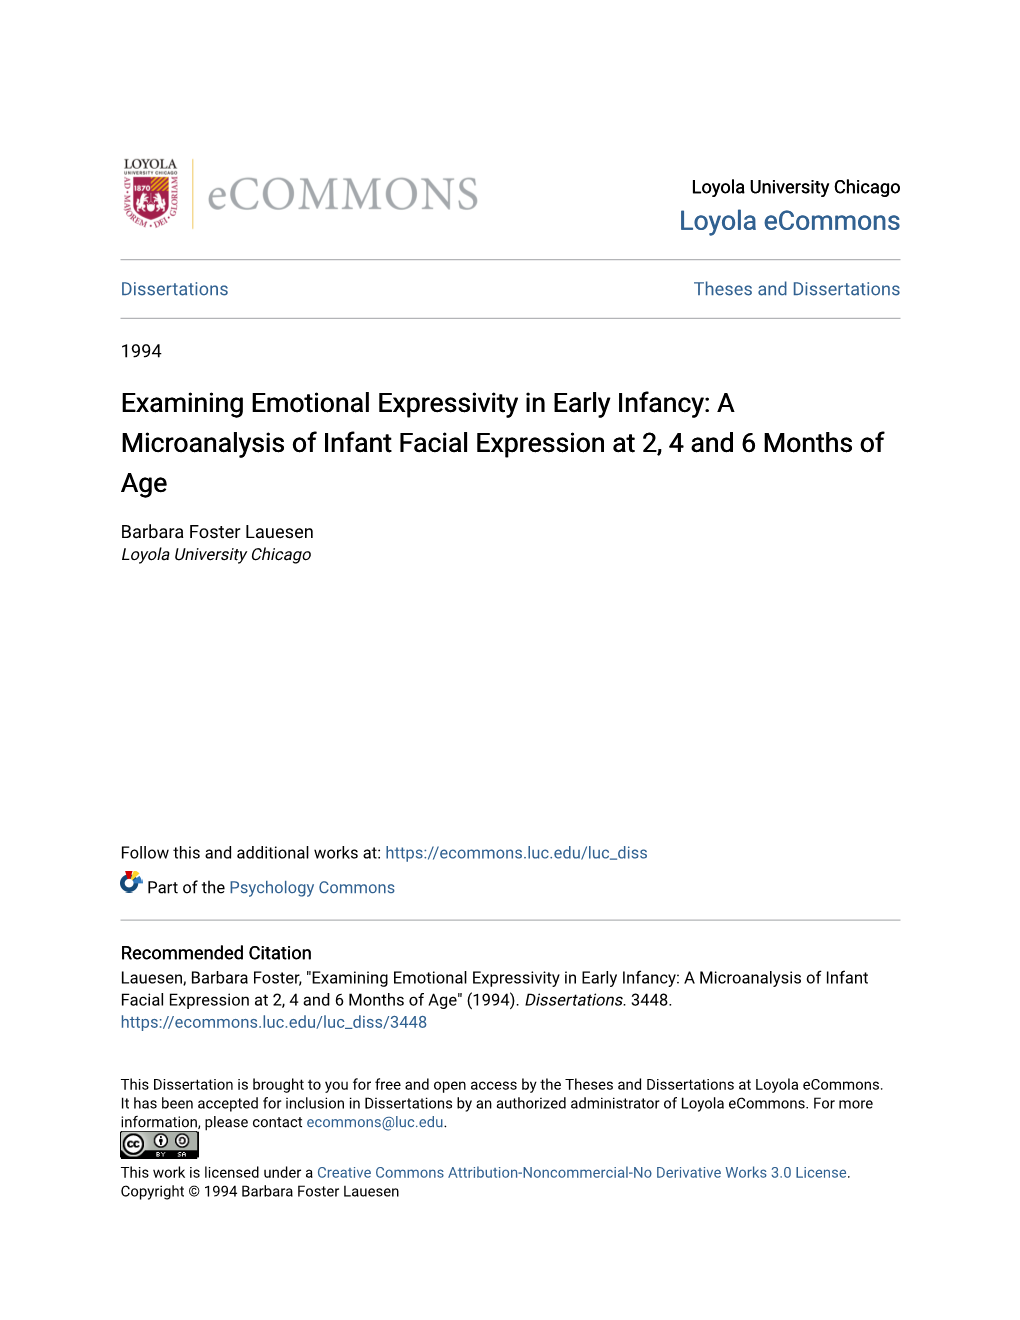 Examining Emotional Expressivity in Early Infancy: a Microanalysis of Infant Facial Expression at 2, 4 and 6 Months of Age